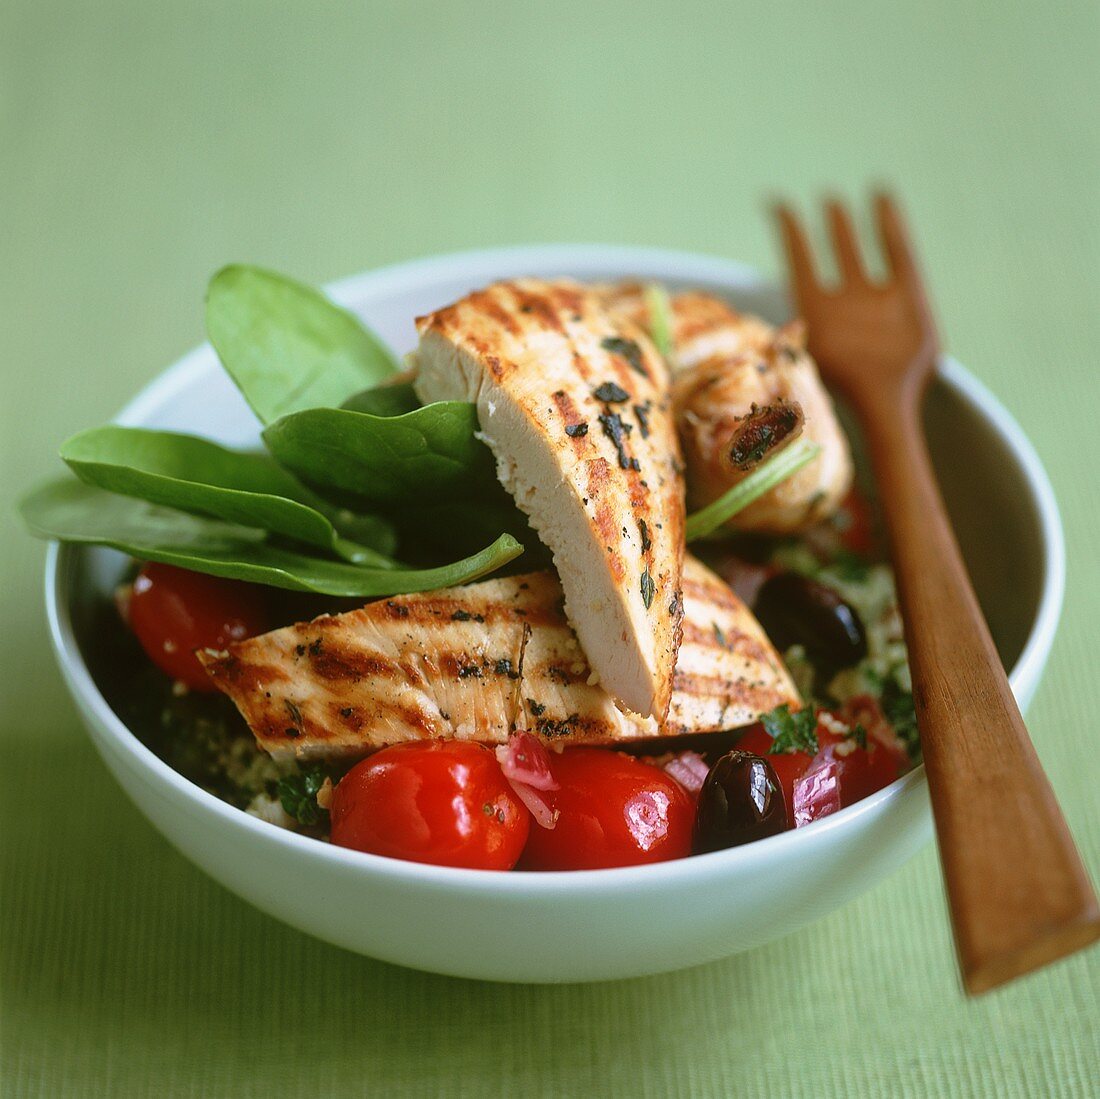 Barbecued chicken breast on couscous with tomatoes and olives